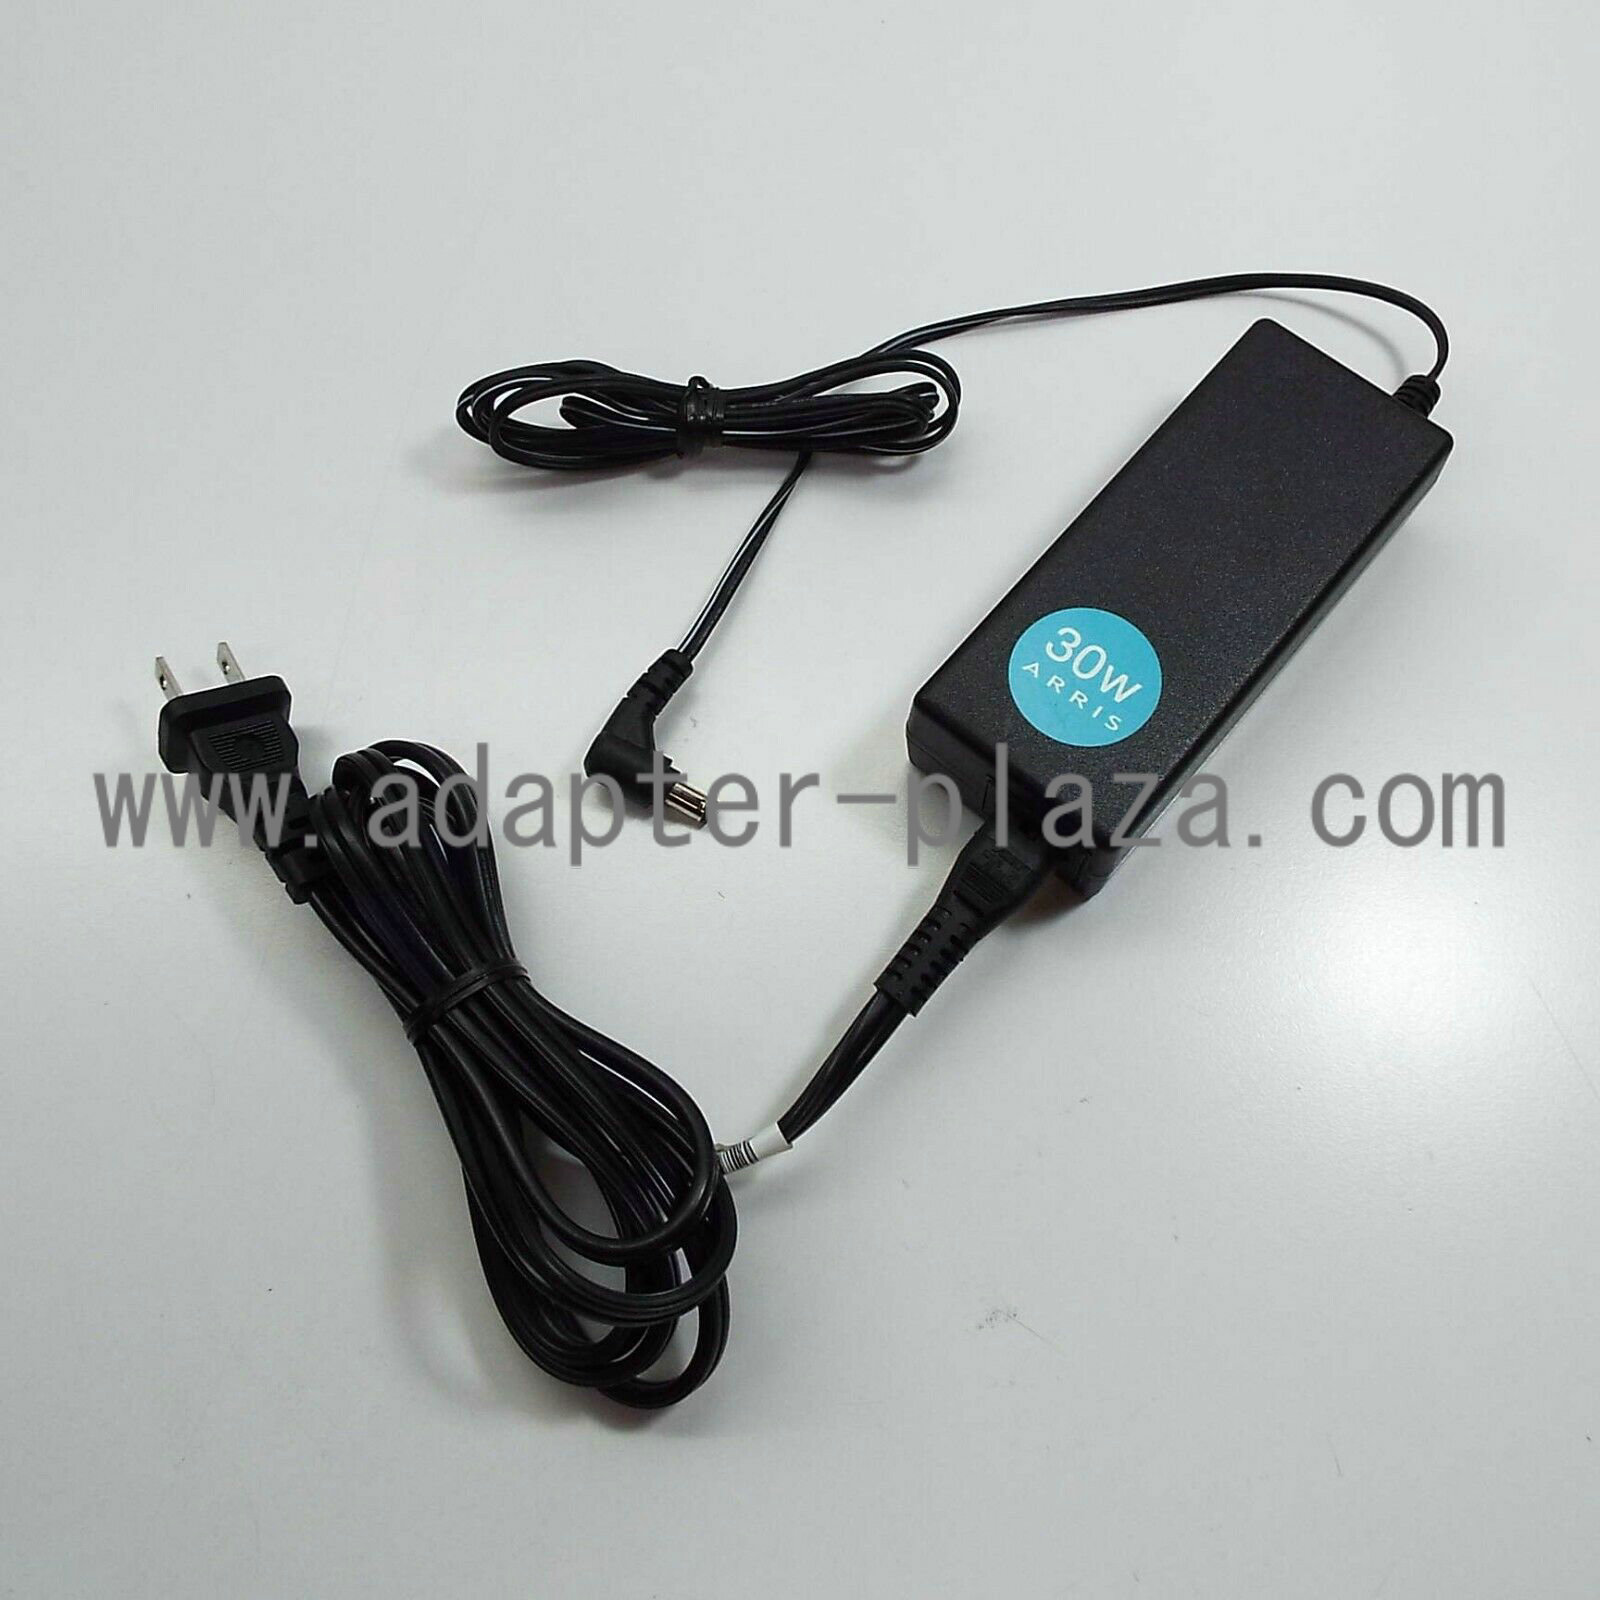 *Brand NEW* 12V 2.5A AC DC Adapter Arris ADP-30AR 539838-007-00 POWER SUPPLY